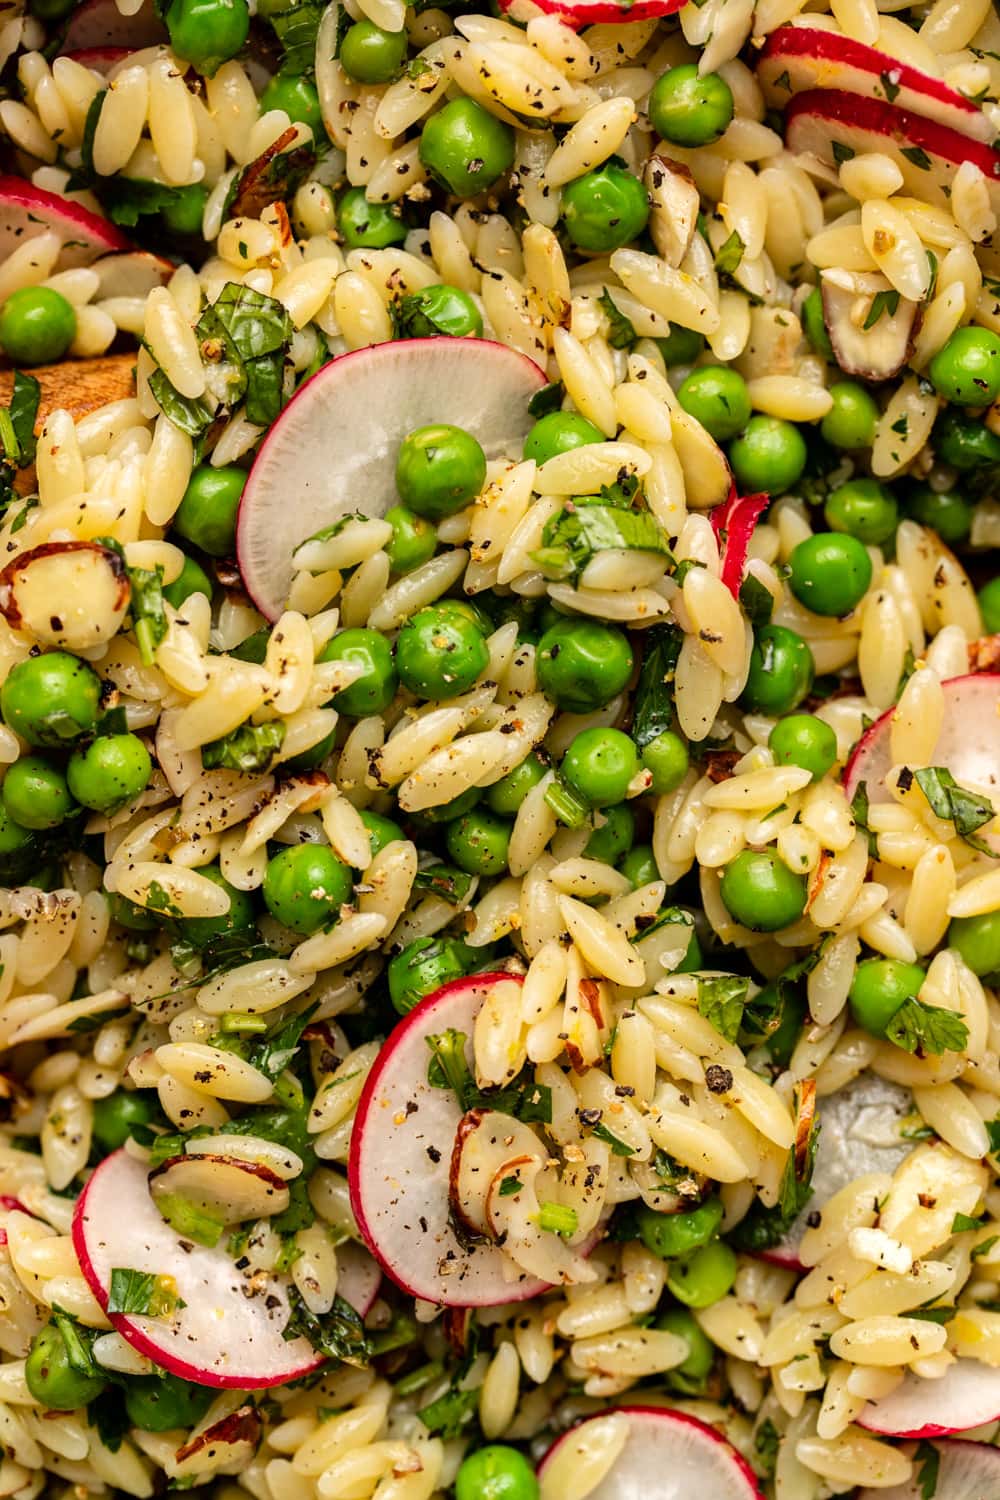 close-up photo of orzo salad with peas, radishes, and fresh herbs